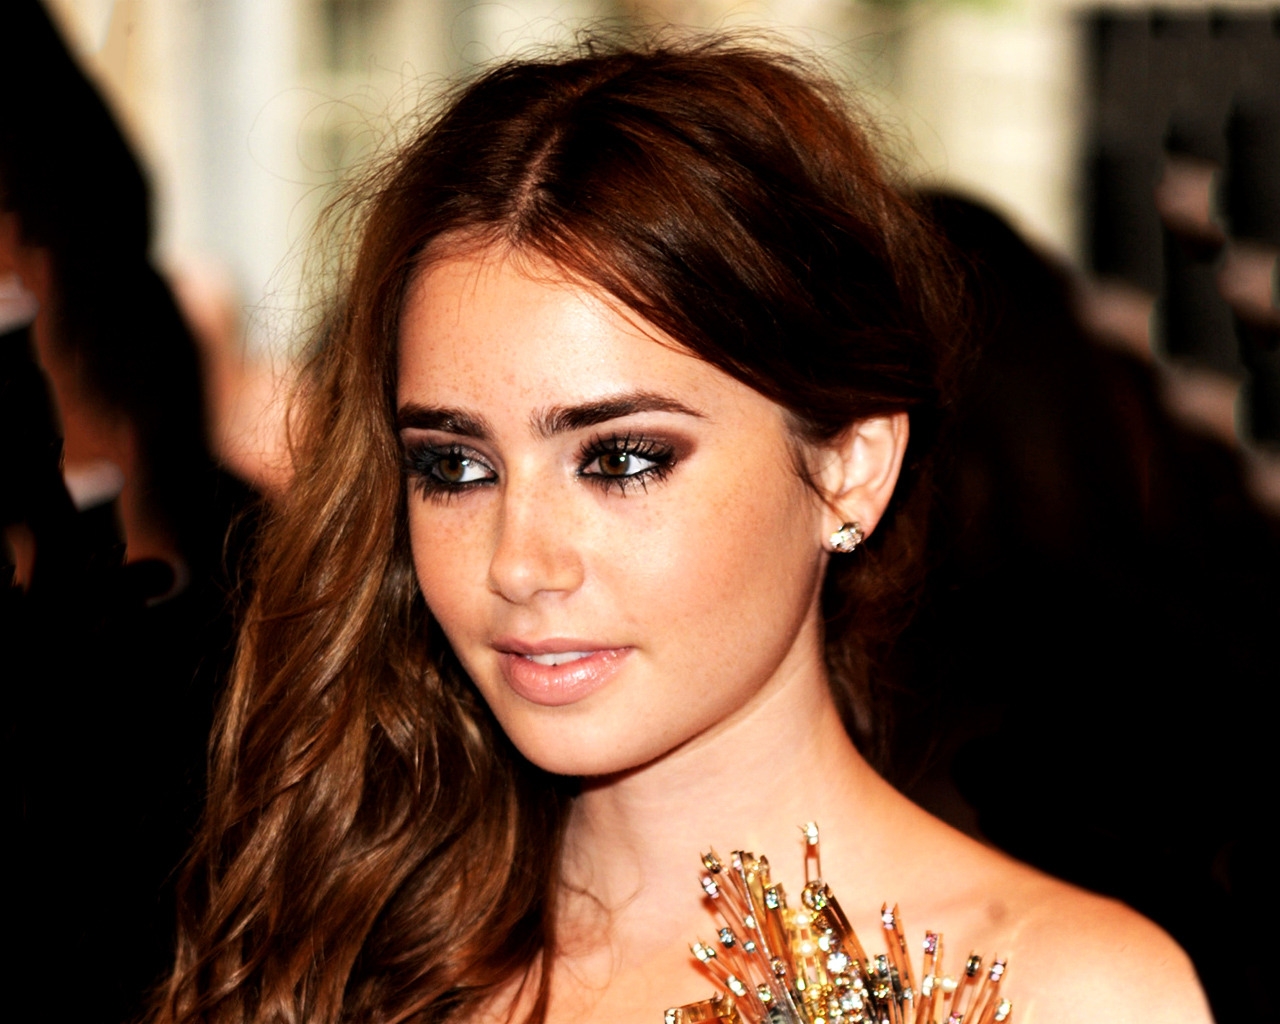 Lily Jane Collins for 1280 x 1024 resolution